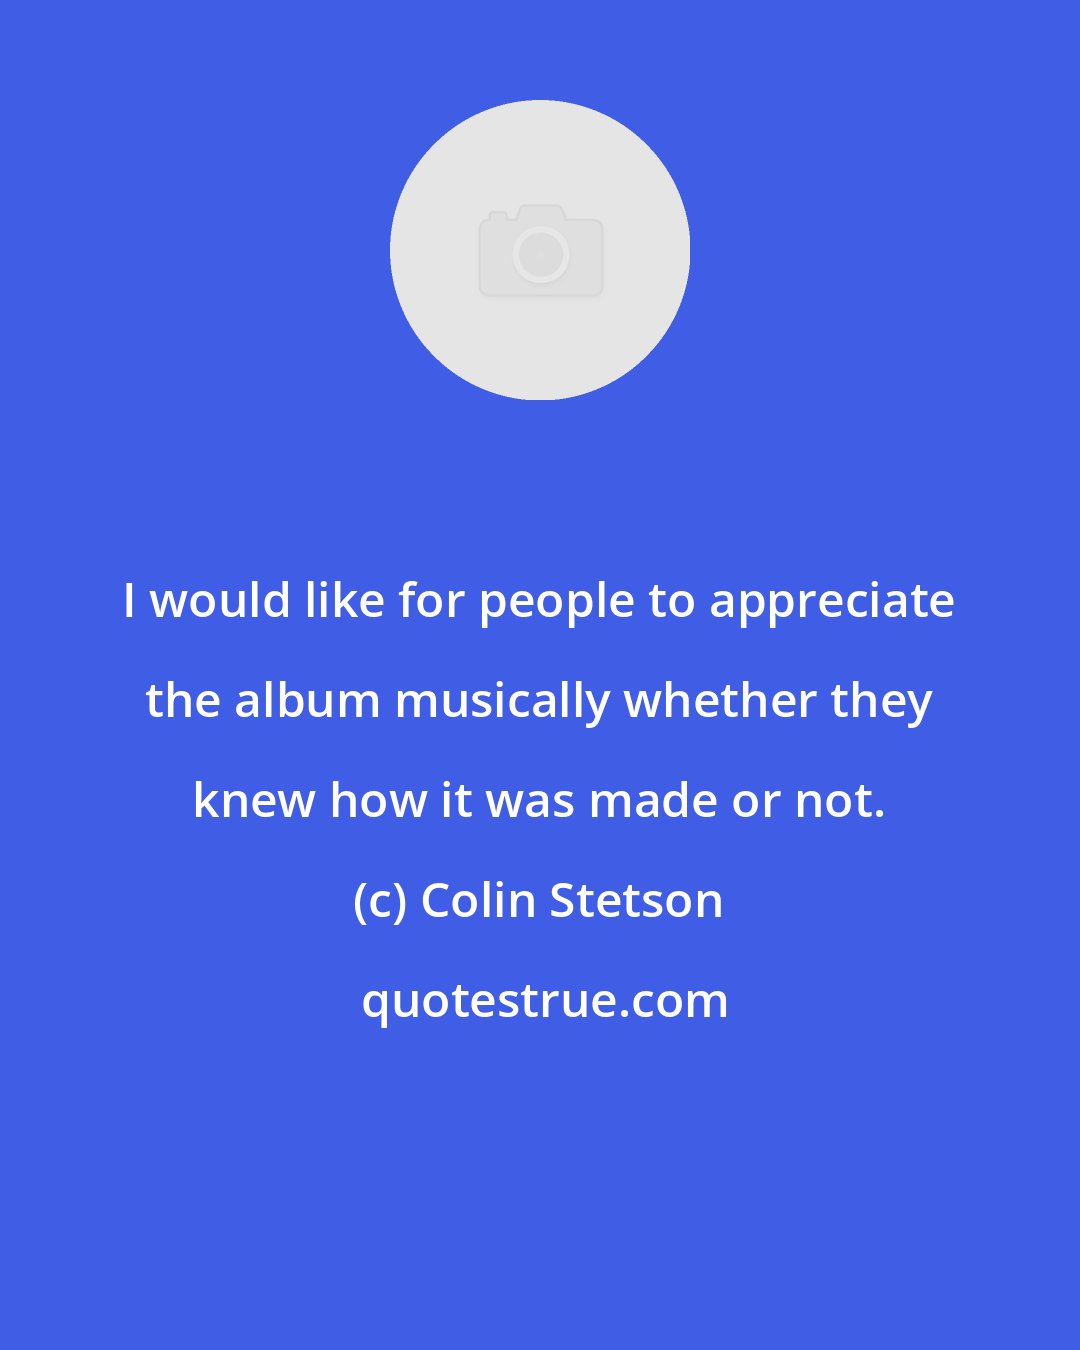 Colin Stetson: I would like for people to appreciate the album musically whether they knew how it was made or not.